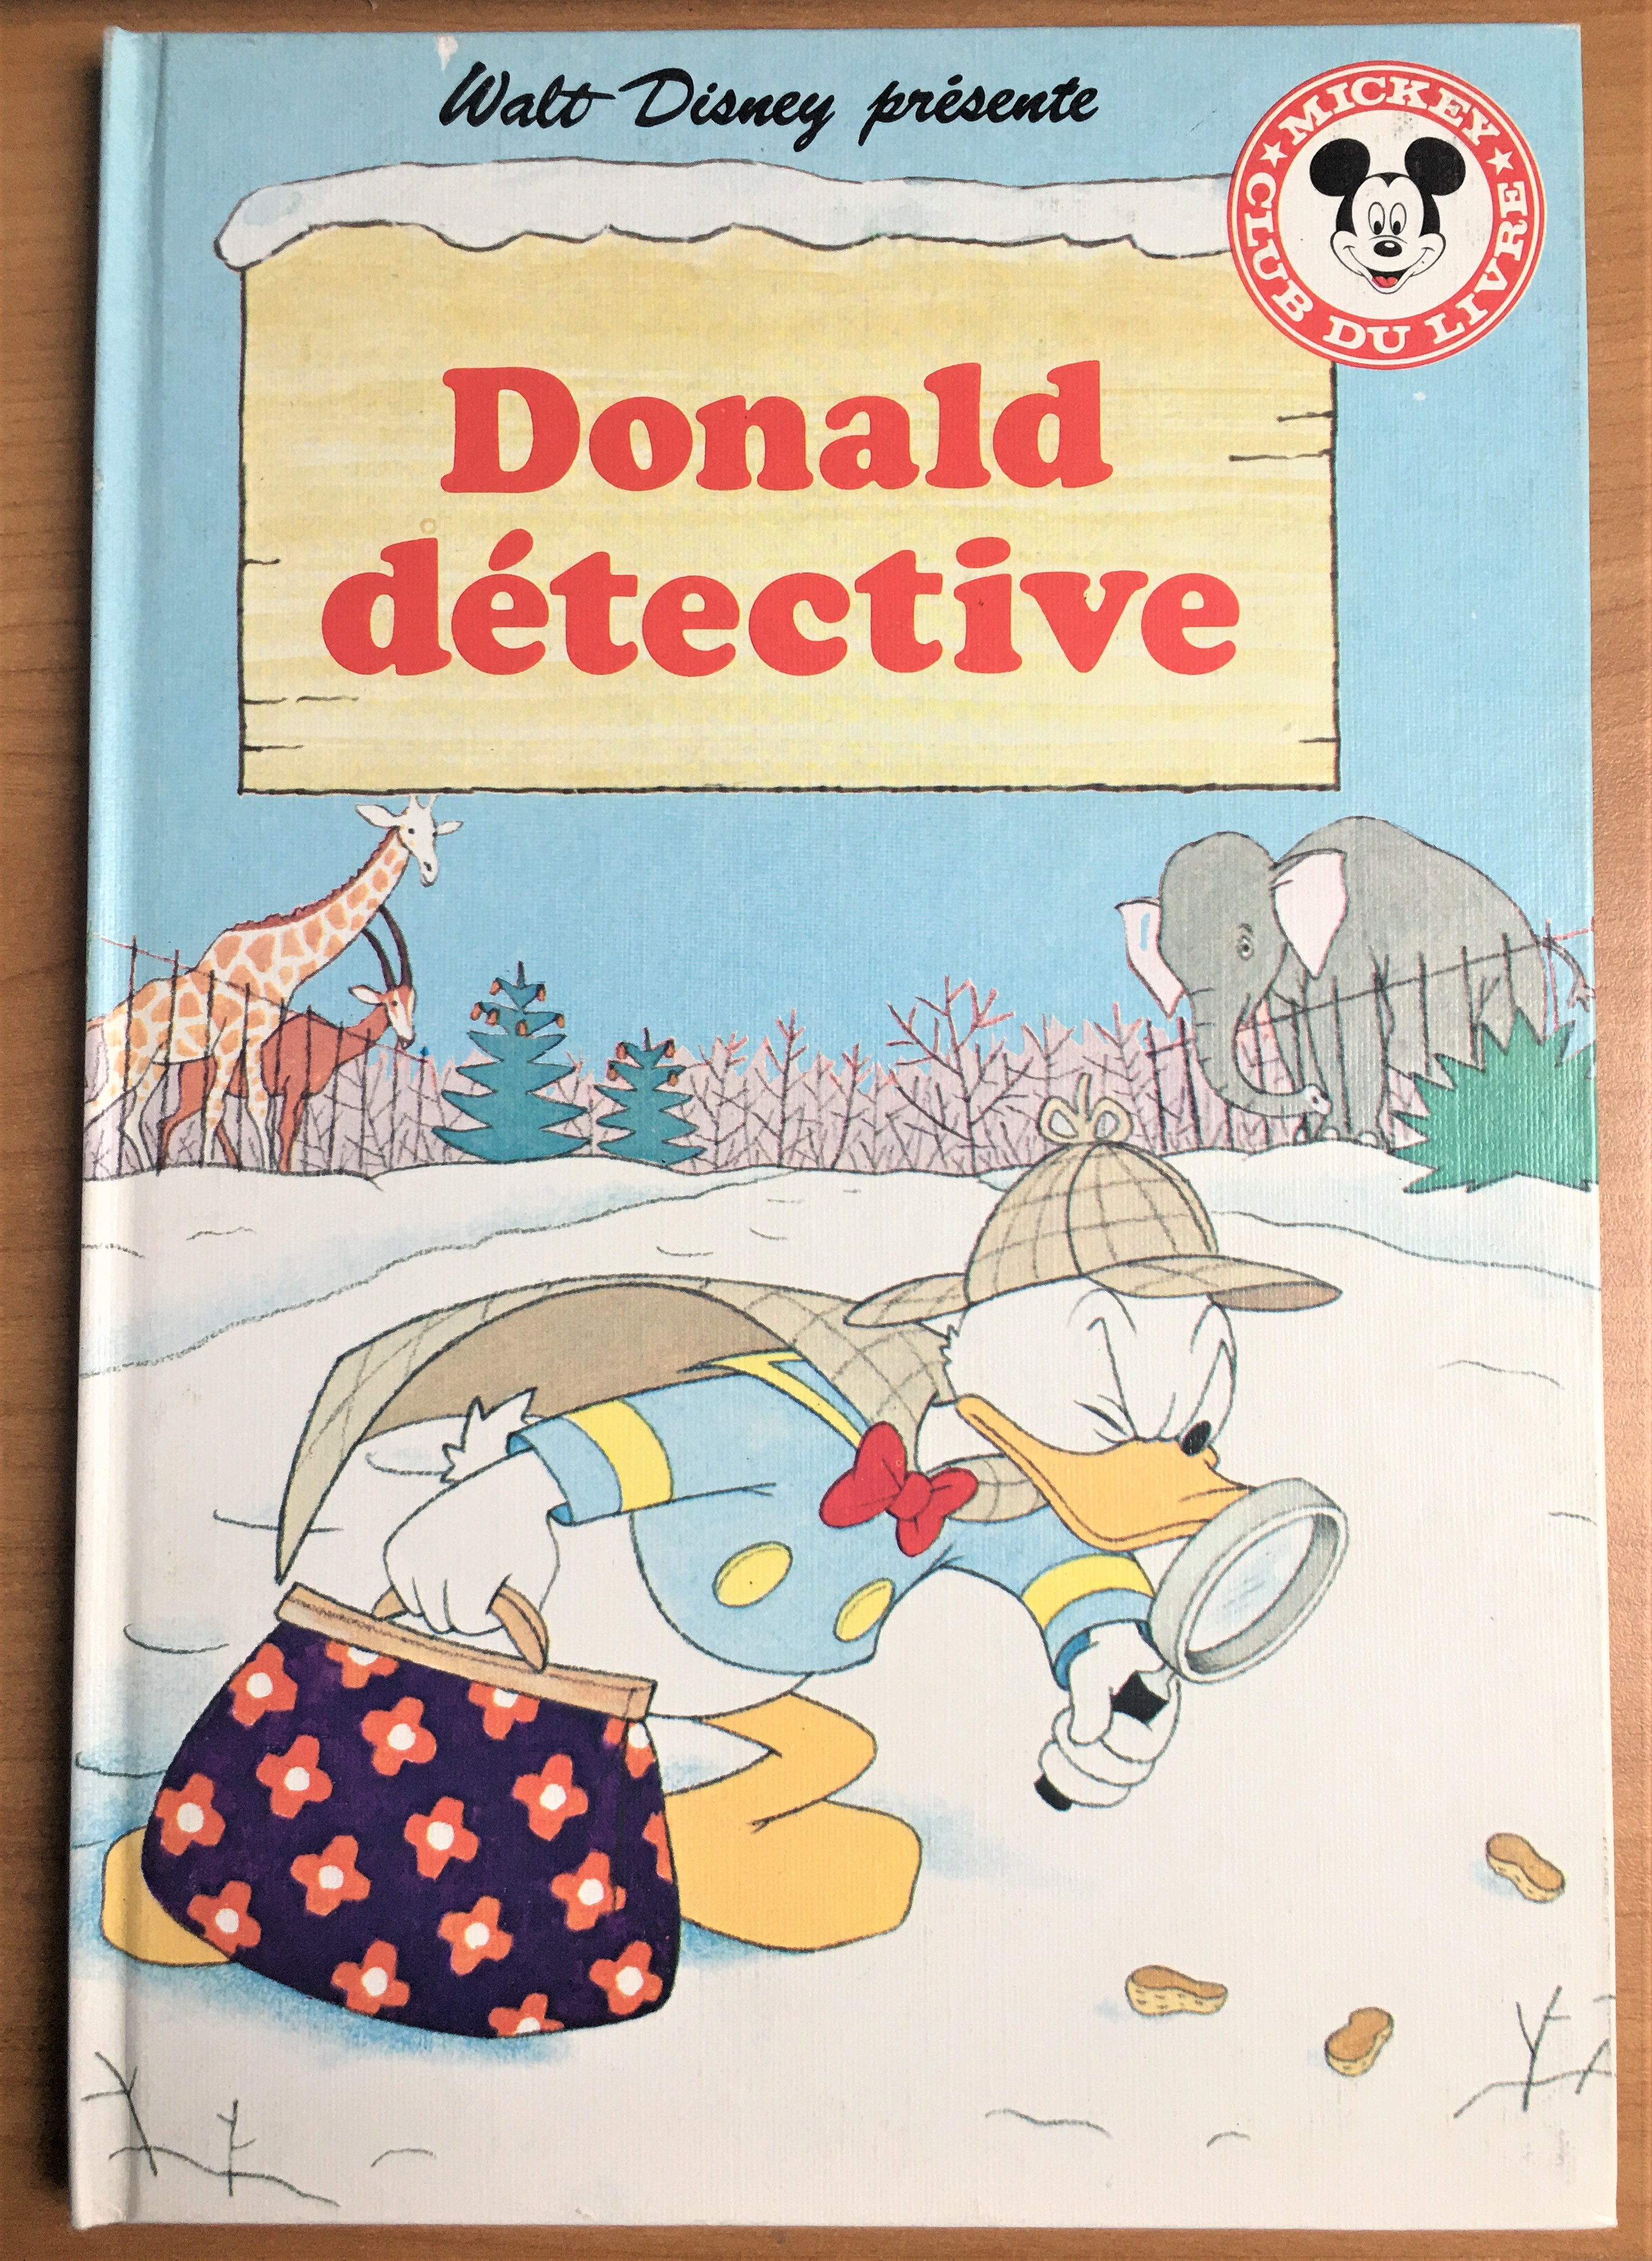 wd-donald-detect